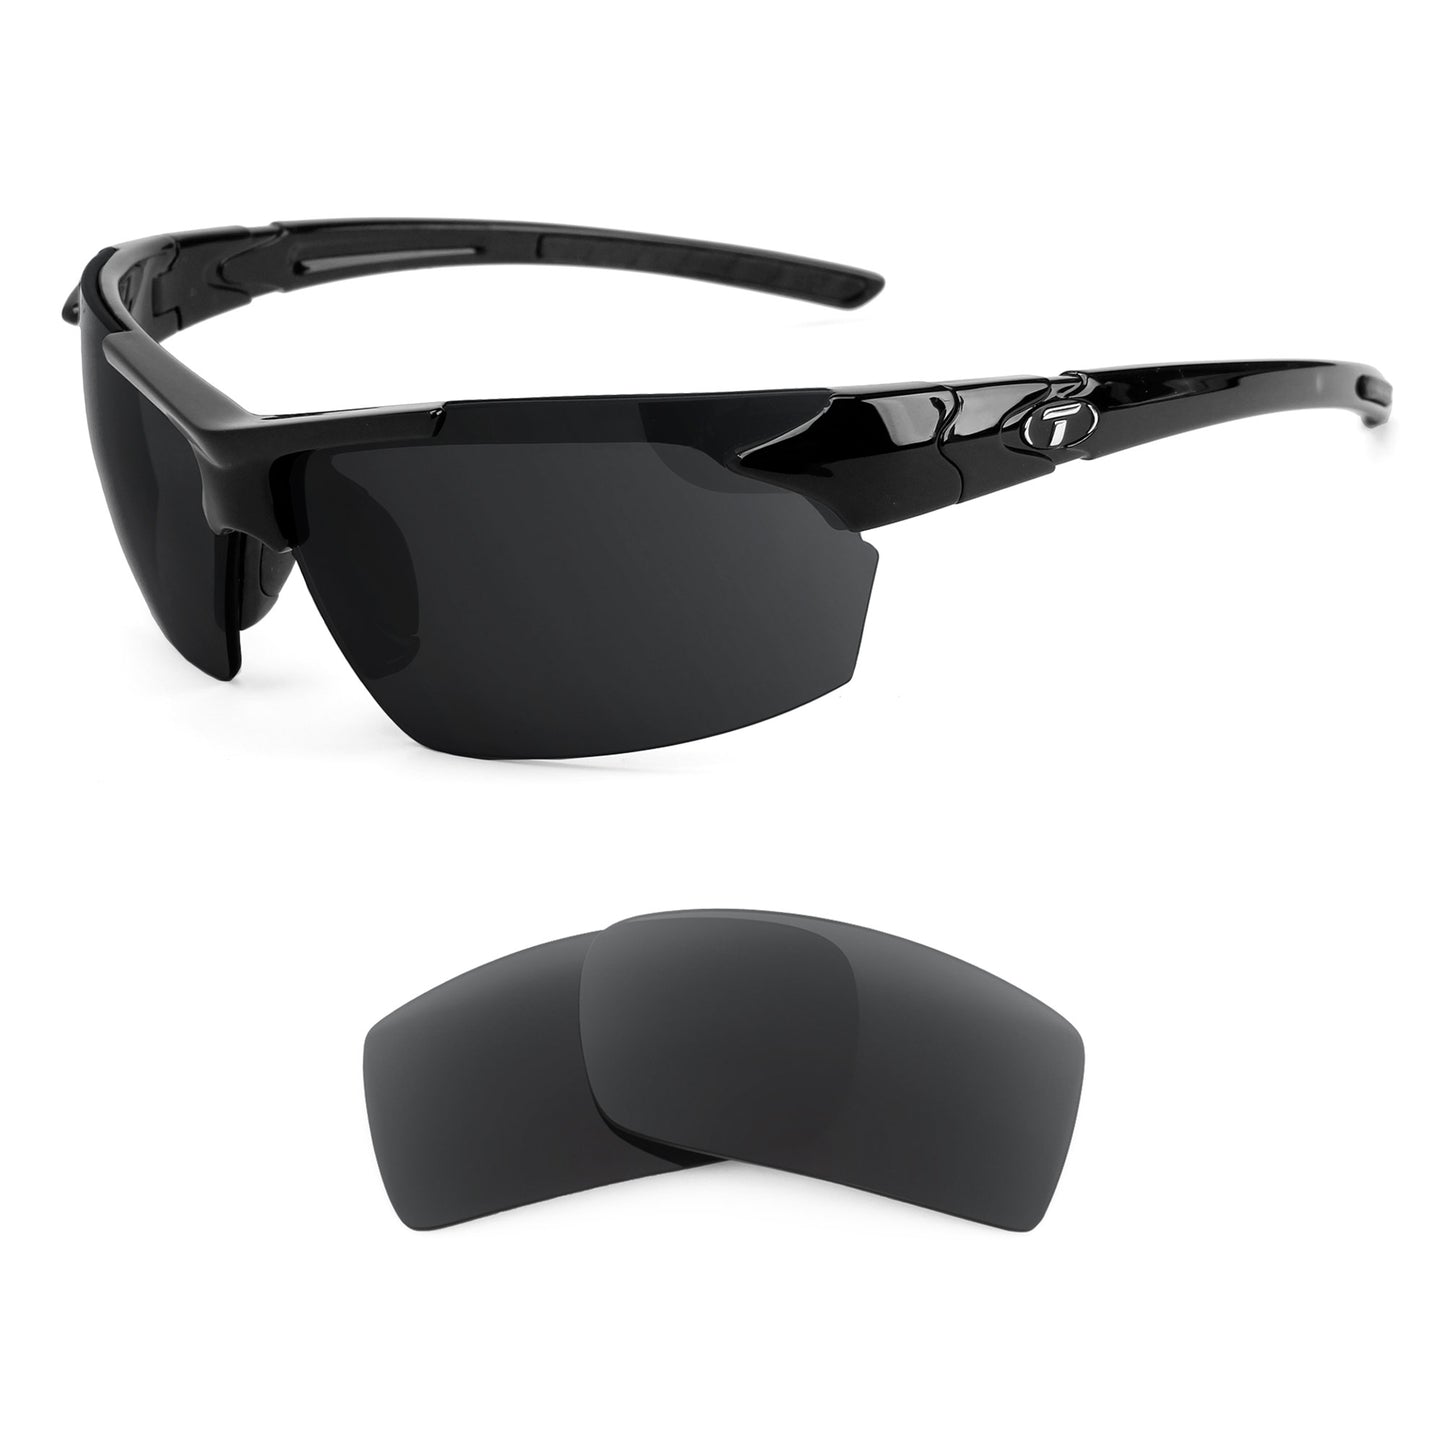 Tifosi Jet sunglasses with replacement lenses